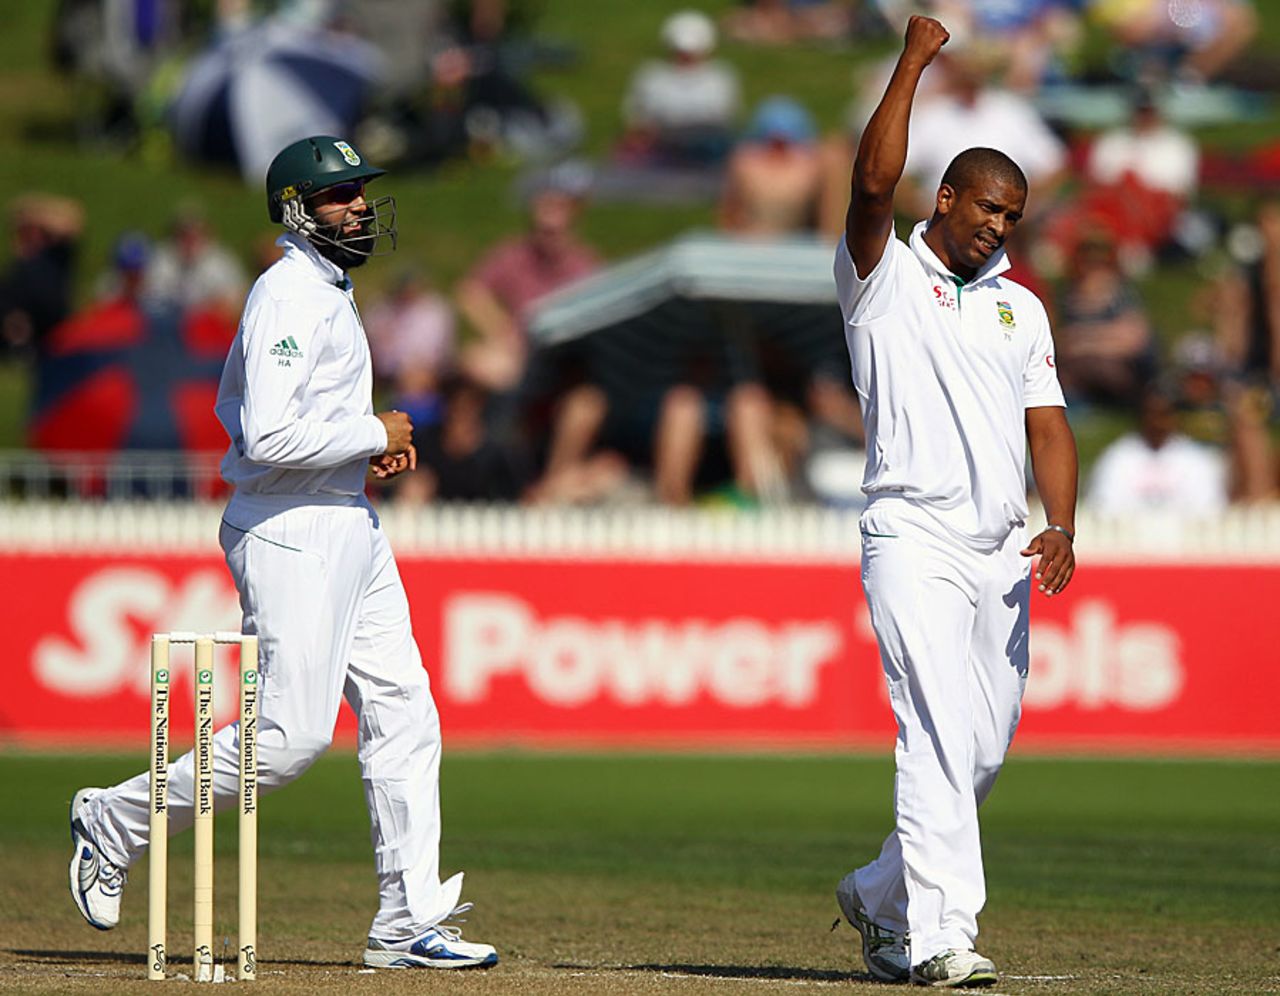 Vernon Philander picked up two early wickets, New Zealand v South Africa, 2nd Test, Hamilton, 2nd day, March 16, 2012